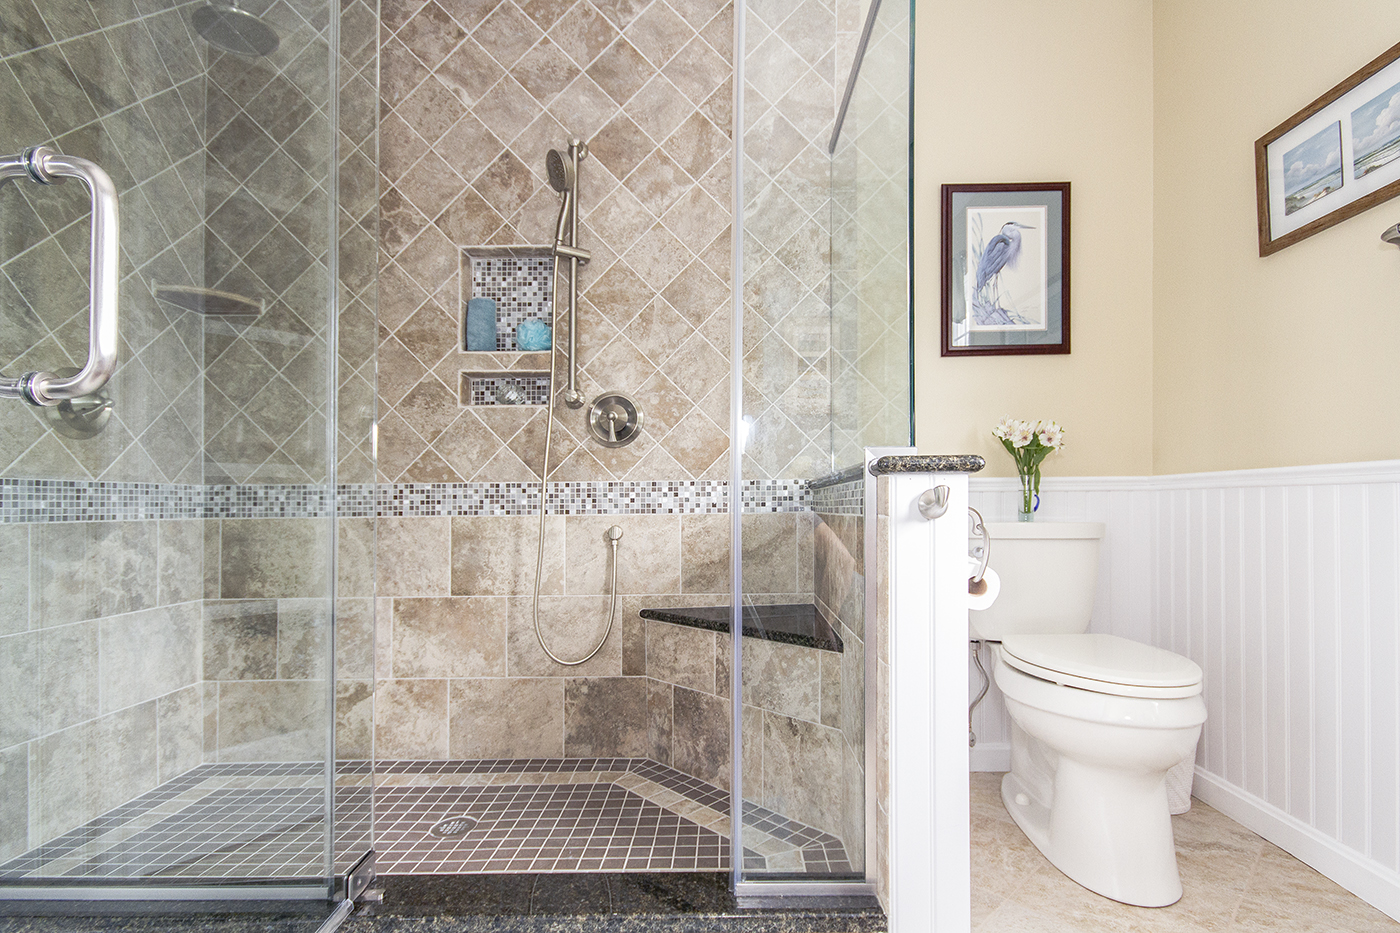 A tiled shower with a glass door.